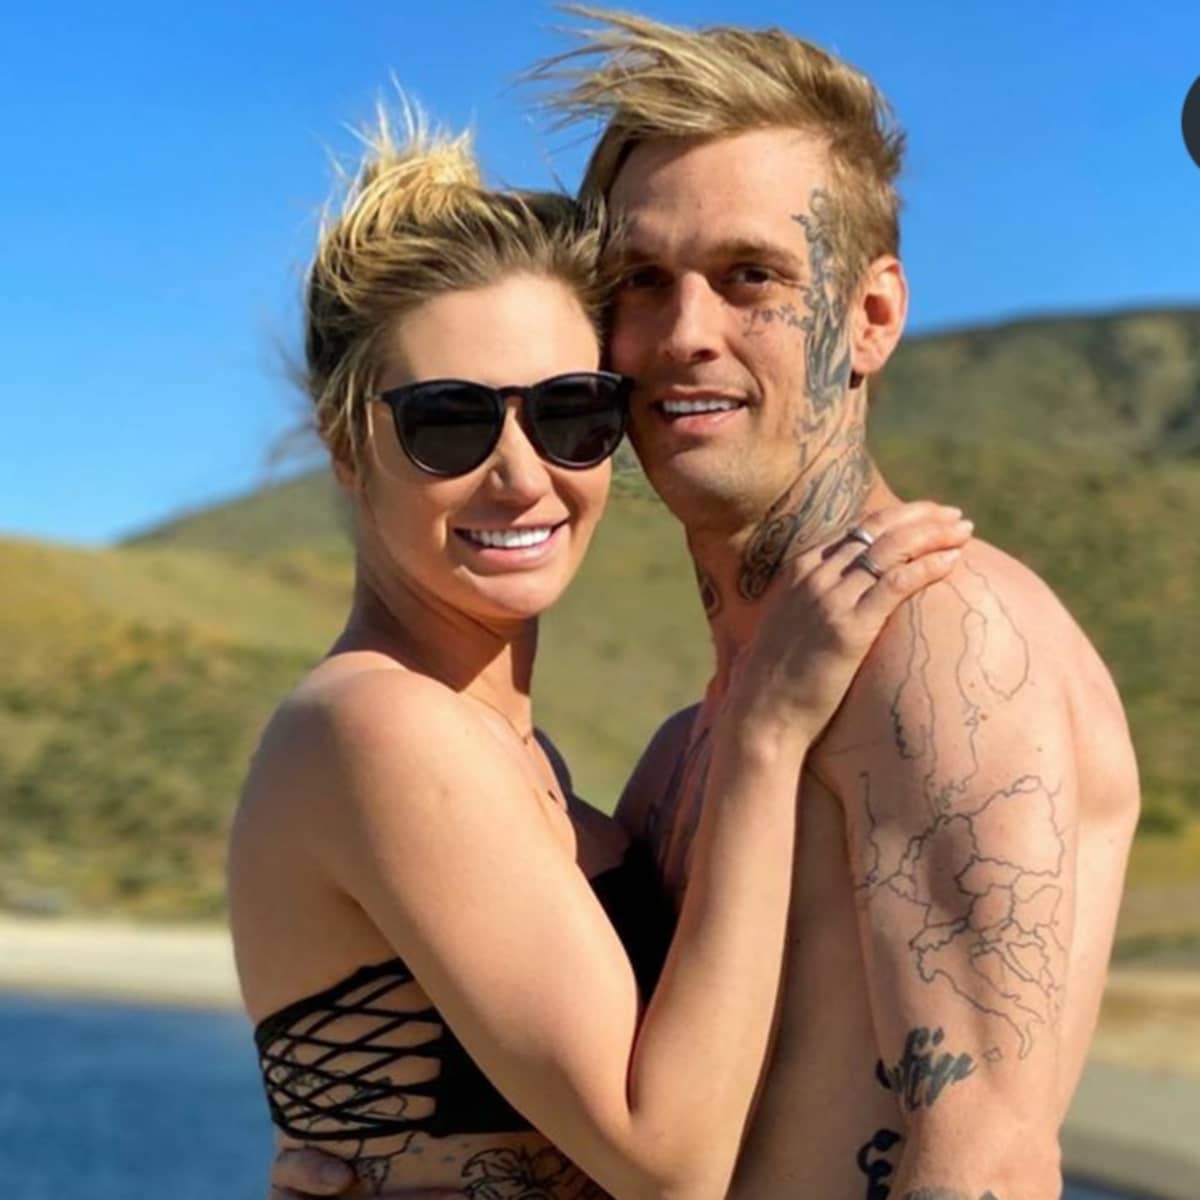 Who is Aaron Carter dating now?